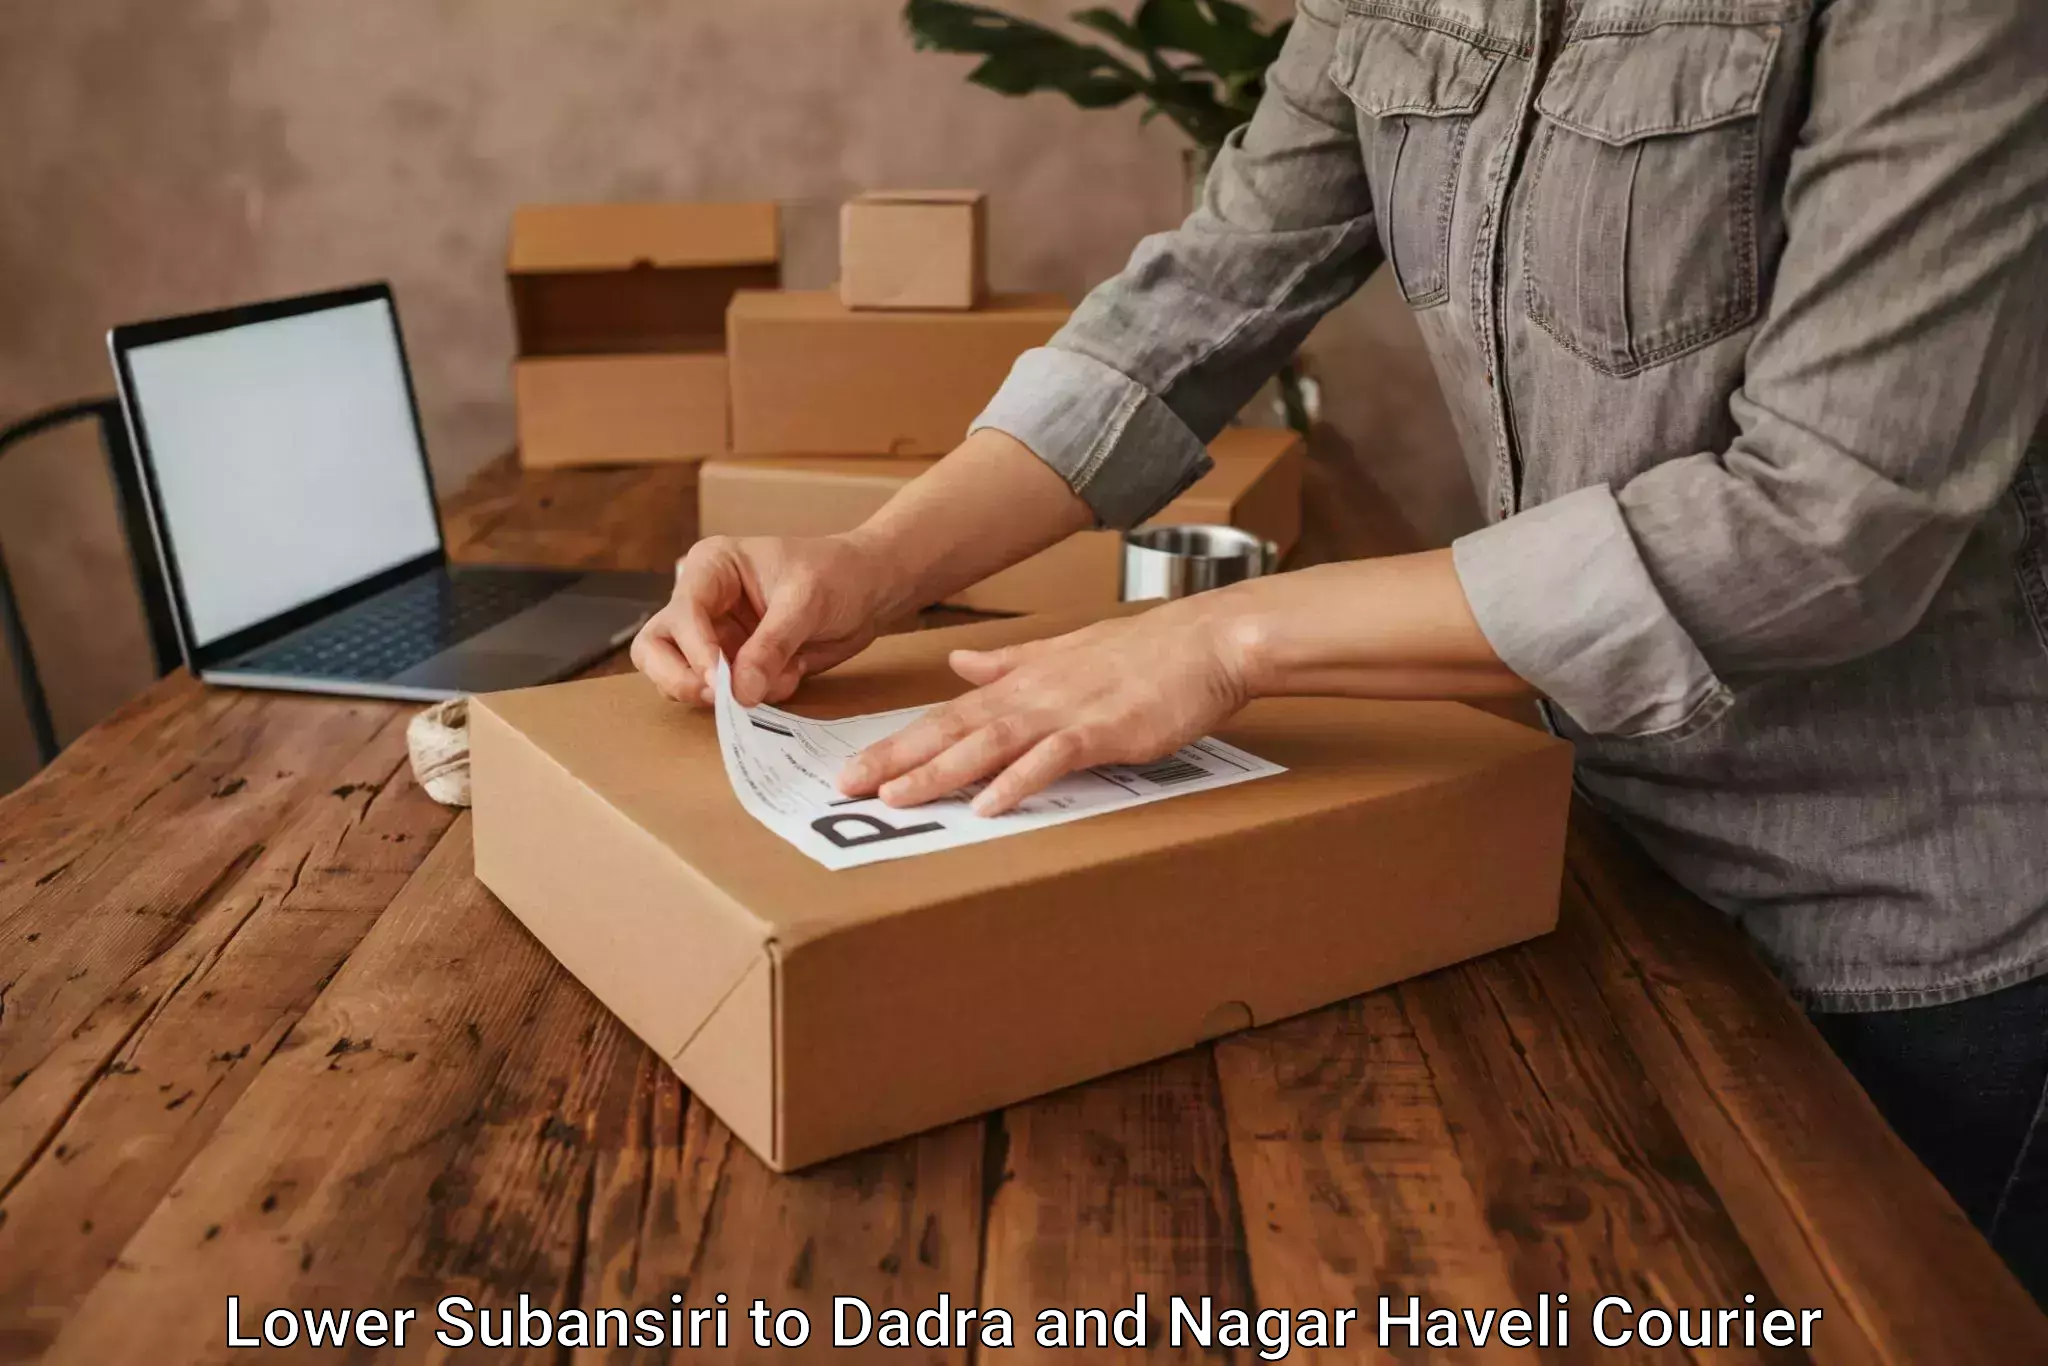 Reliable courier services Lower Subansiri to Dadra and Nagar Haveli